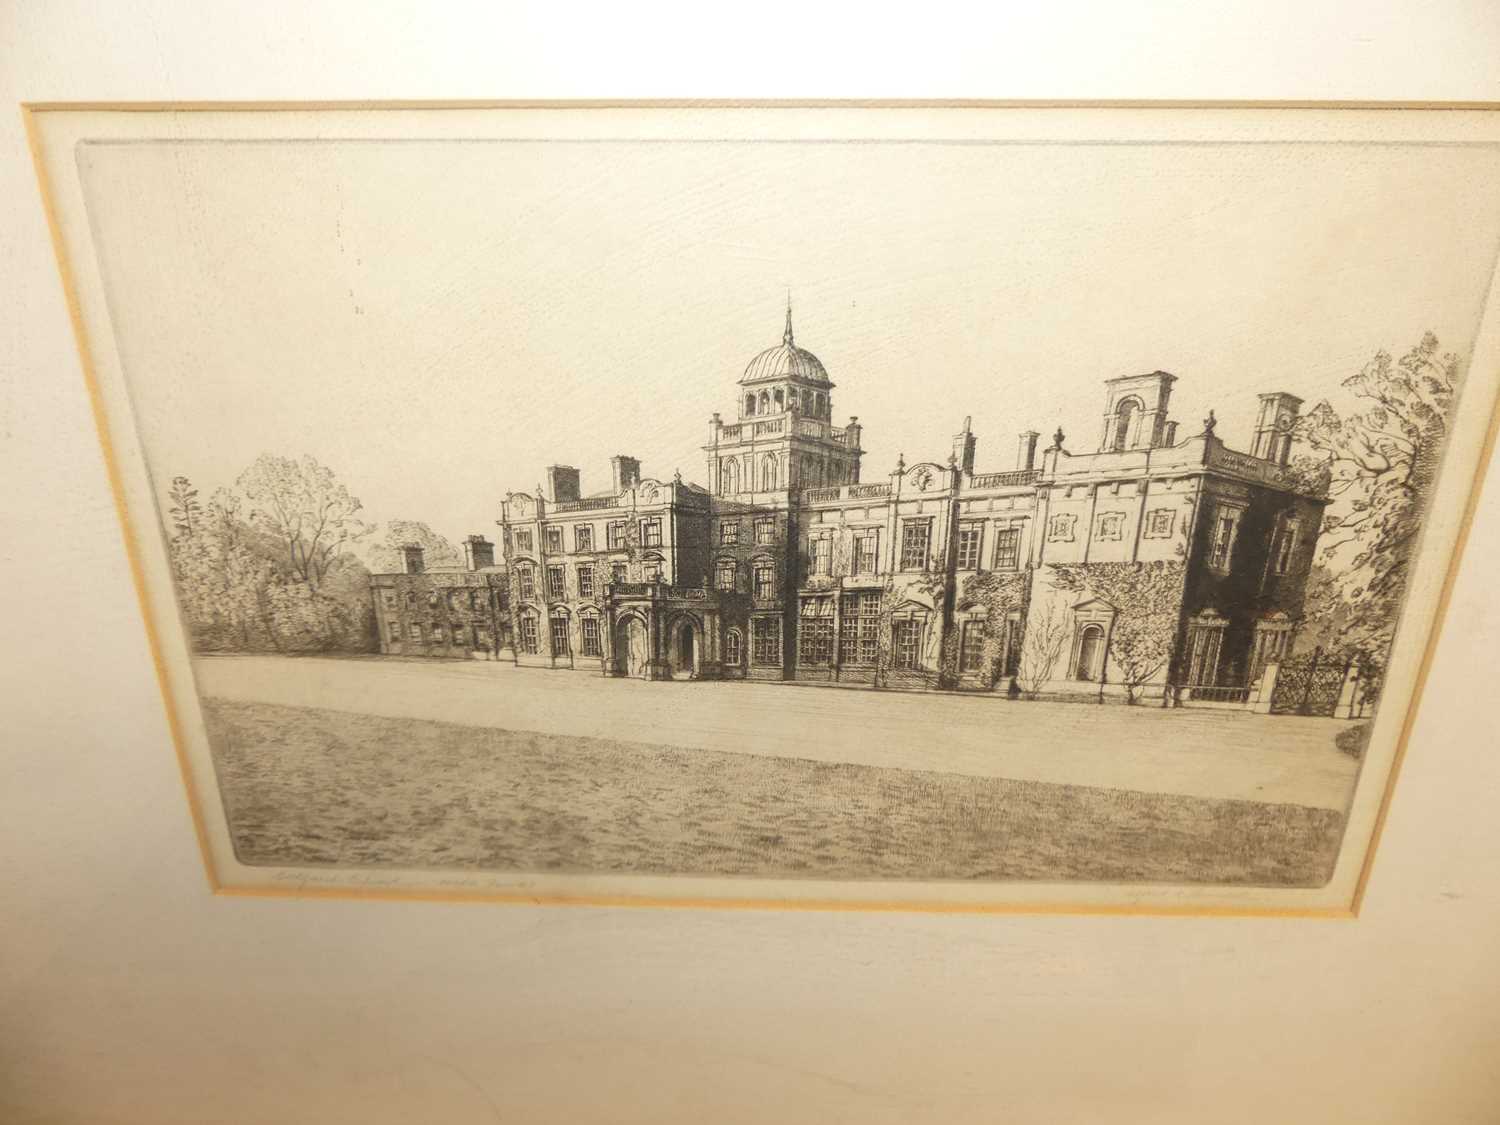 Alfred Blundell - Culford School etching, 22x34cm, together with Dorothy Sweet, Norman Gateway, Bury - Image 2 of 3